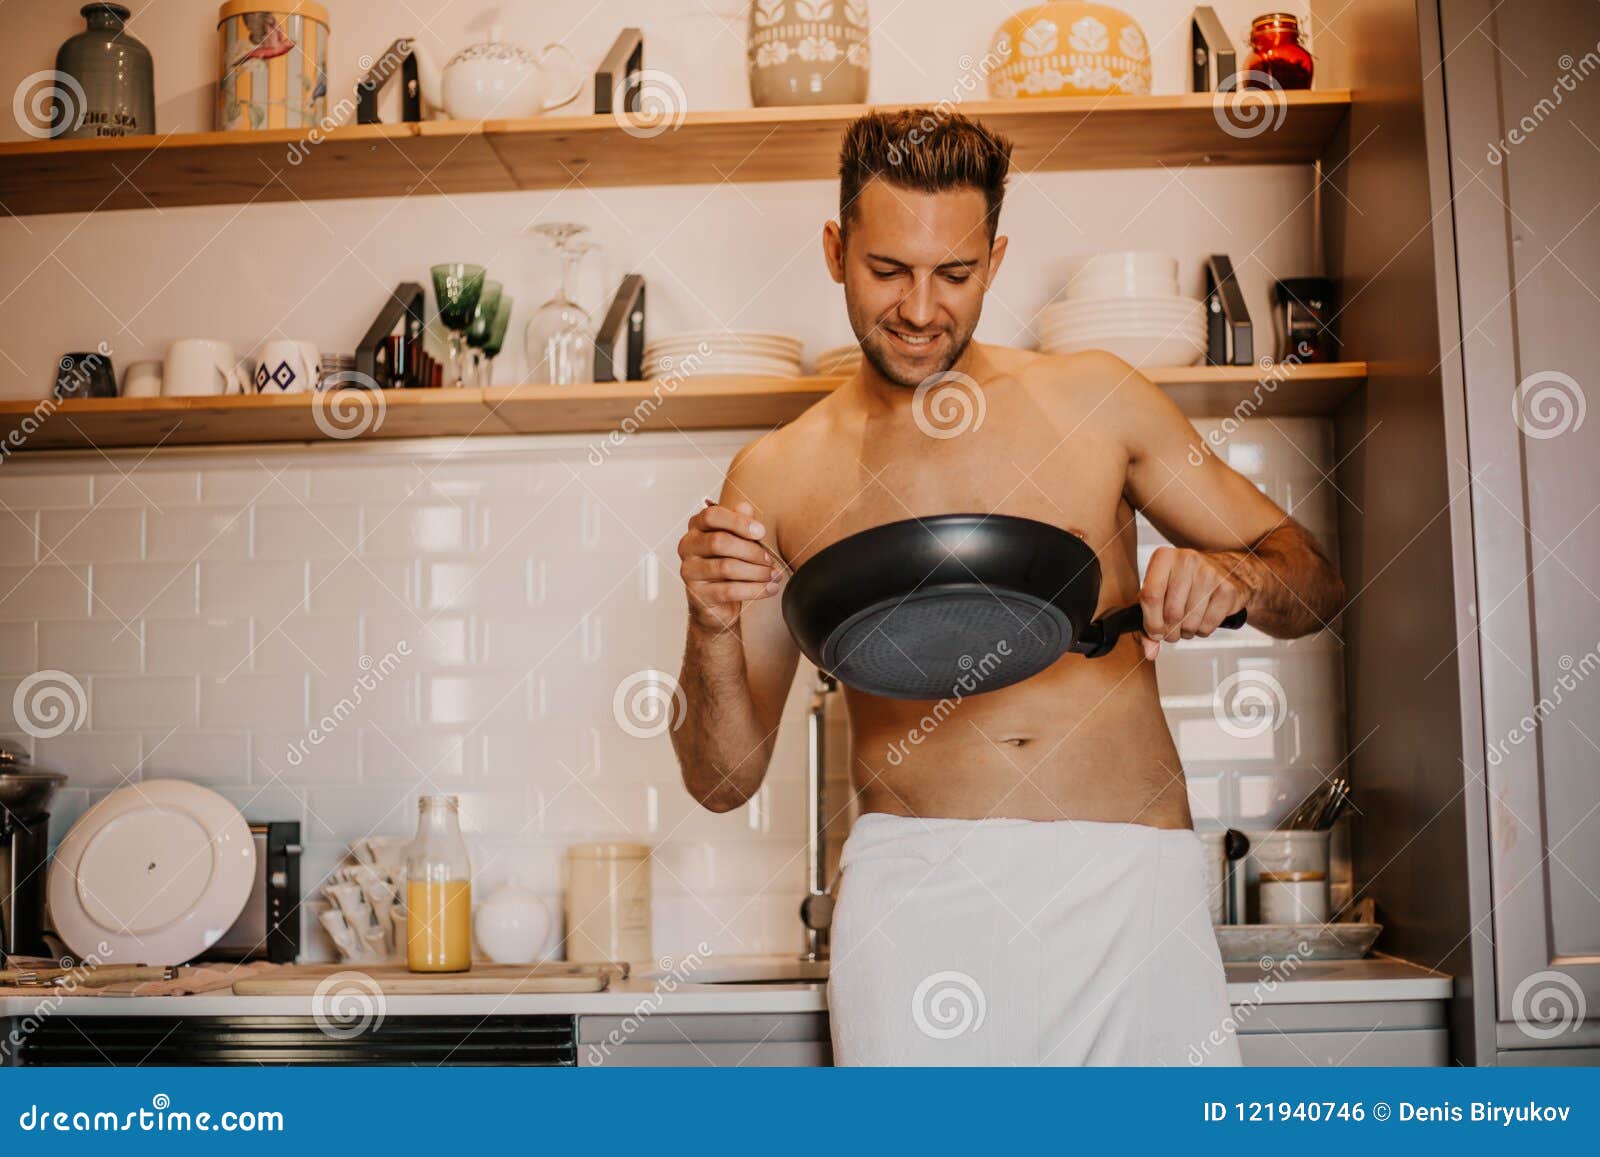 Nude chef the The Real